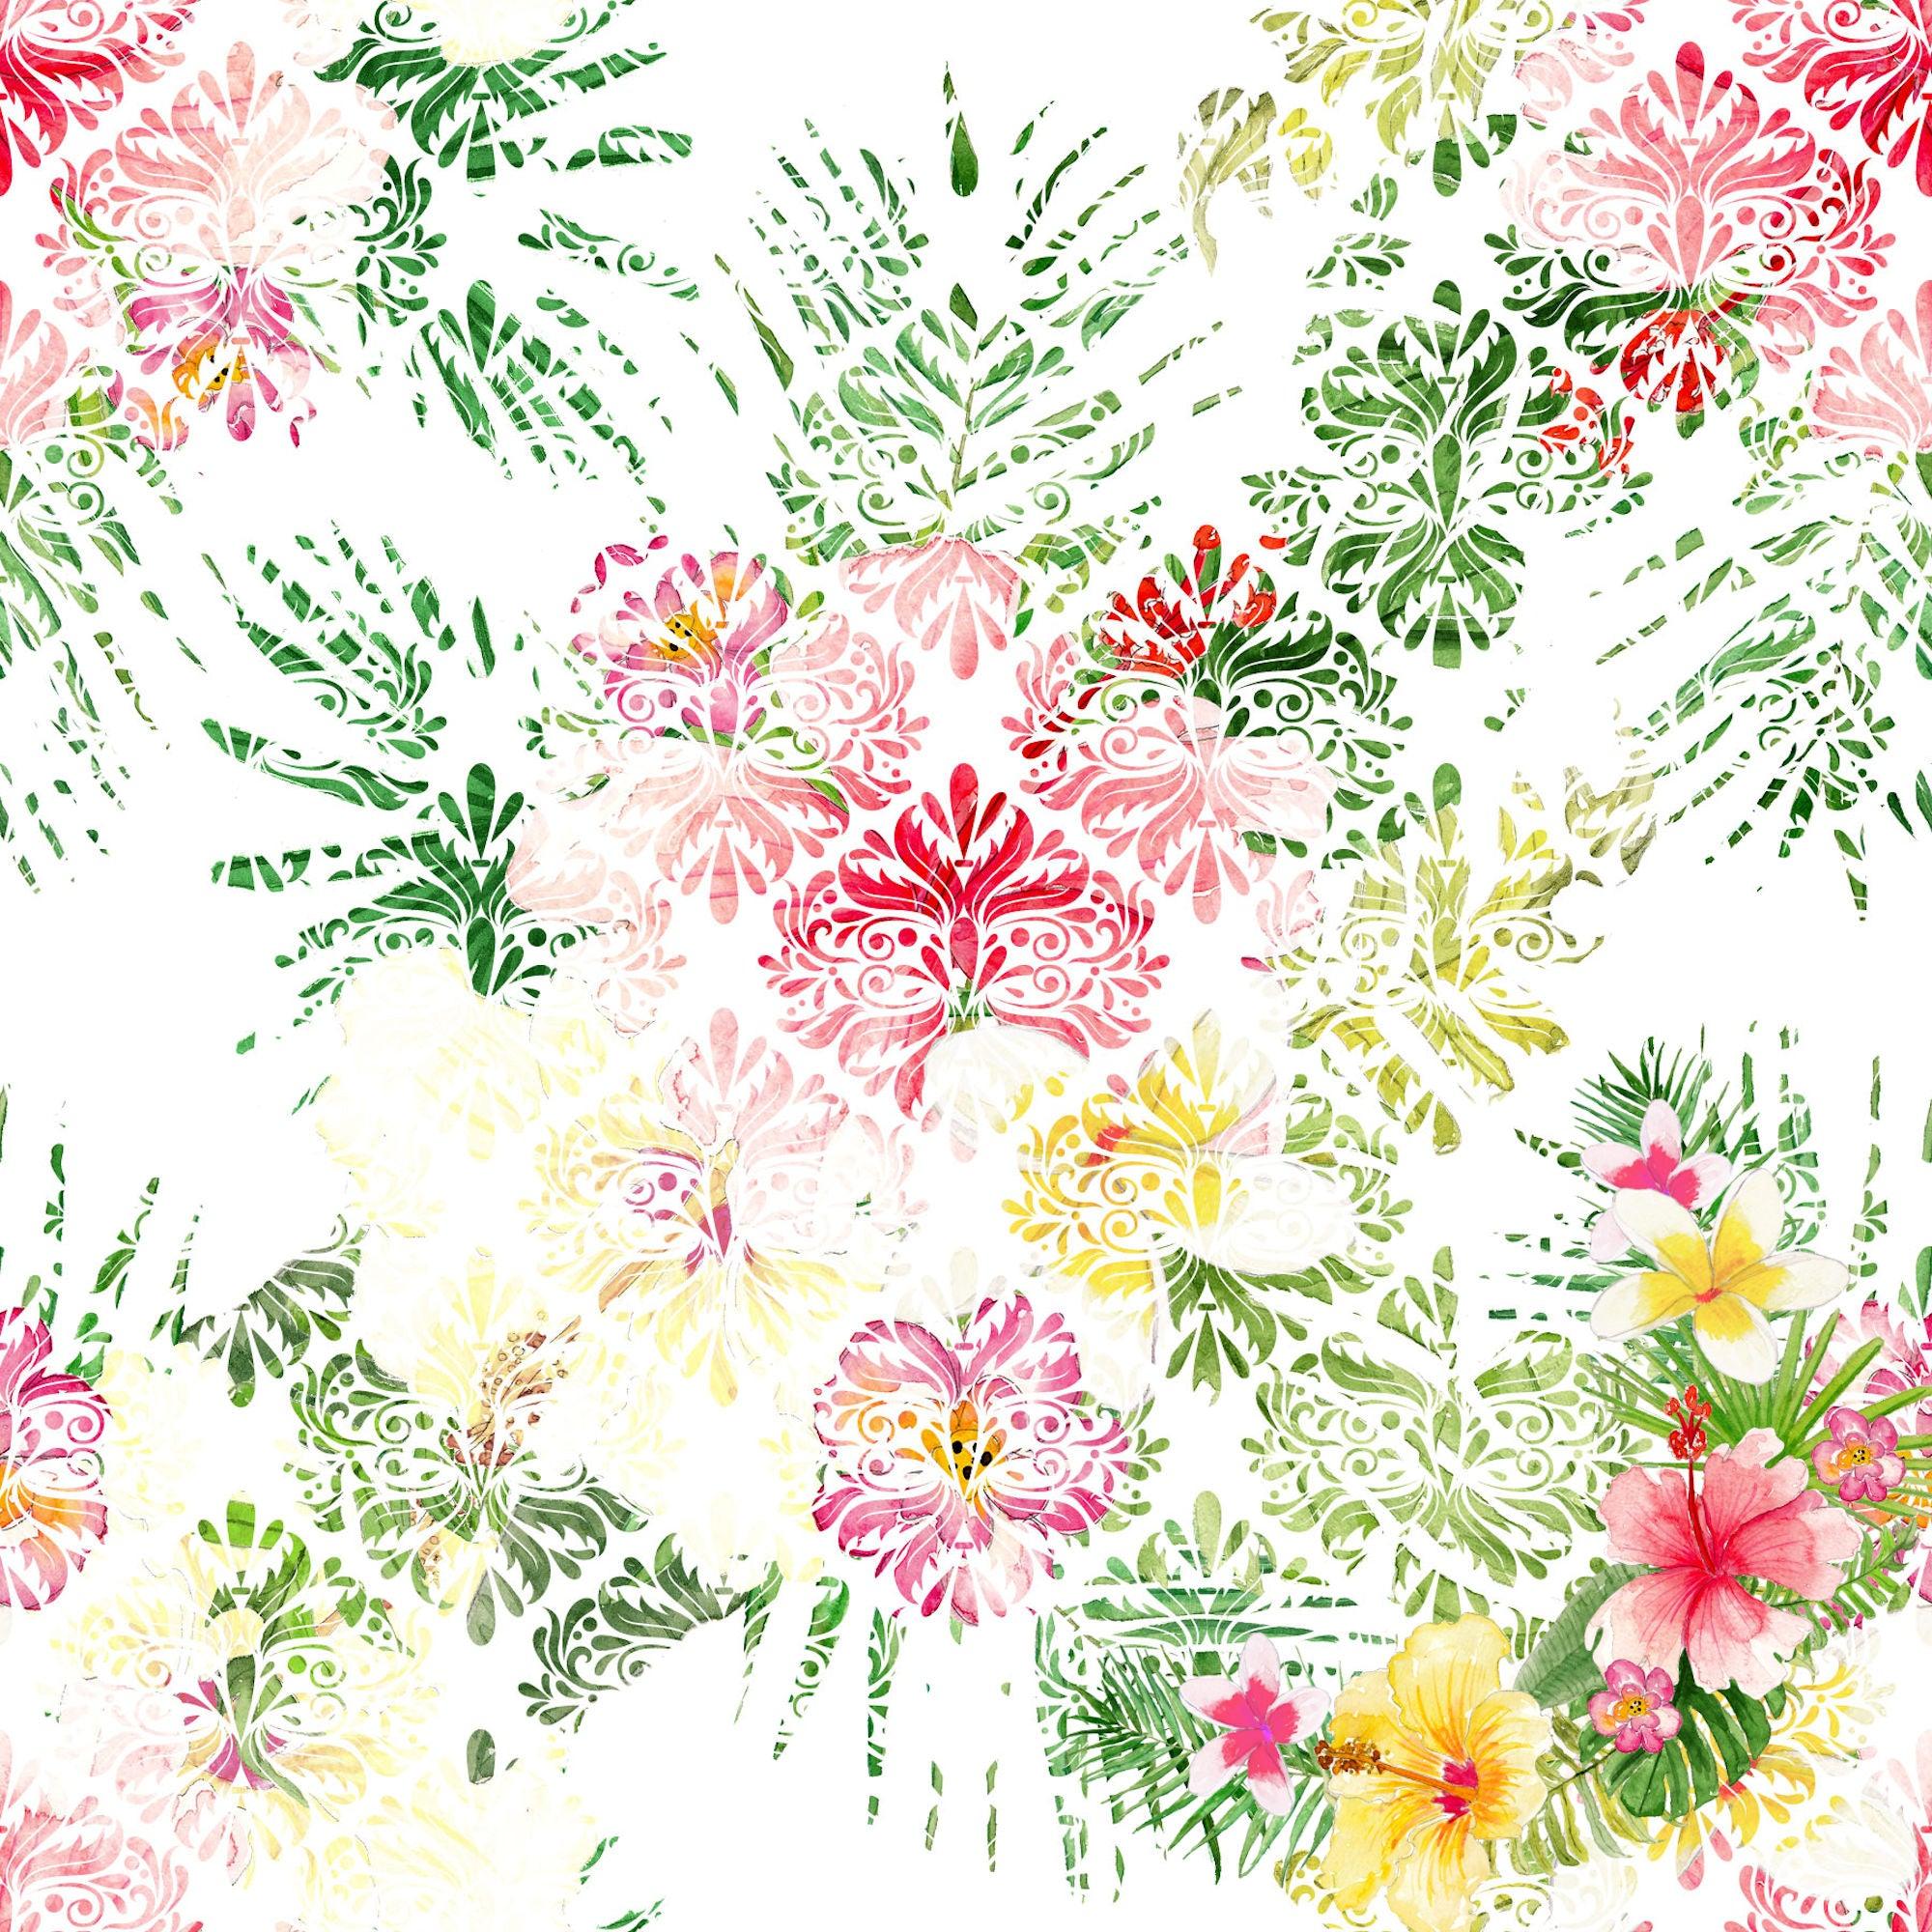 Aloha, Hawaii Collection Hawaiian Hibiscus 12 x 12 Double-Sided Scrapbook Paper by SSC Designs - Scrapbook Supply Companies